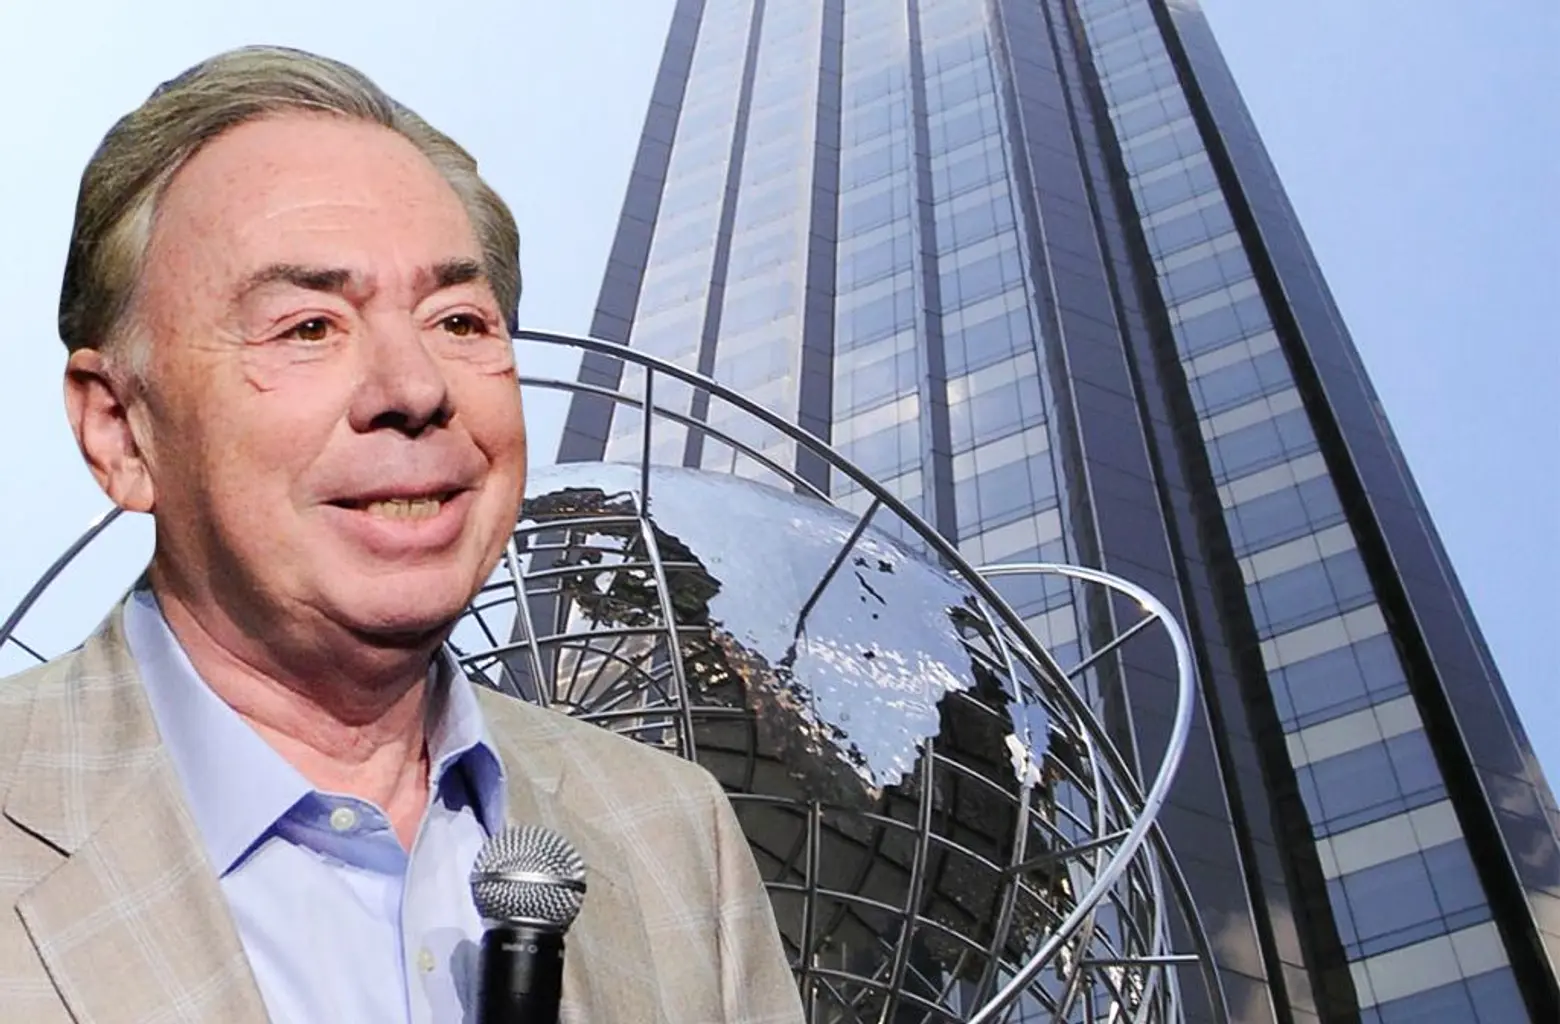 Composer Andrew Lloyd Webber buys second condo at Trump International for $7.6M